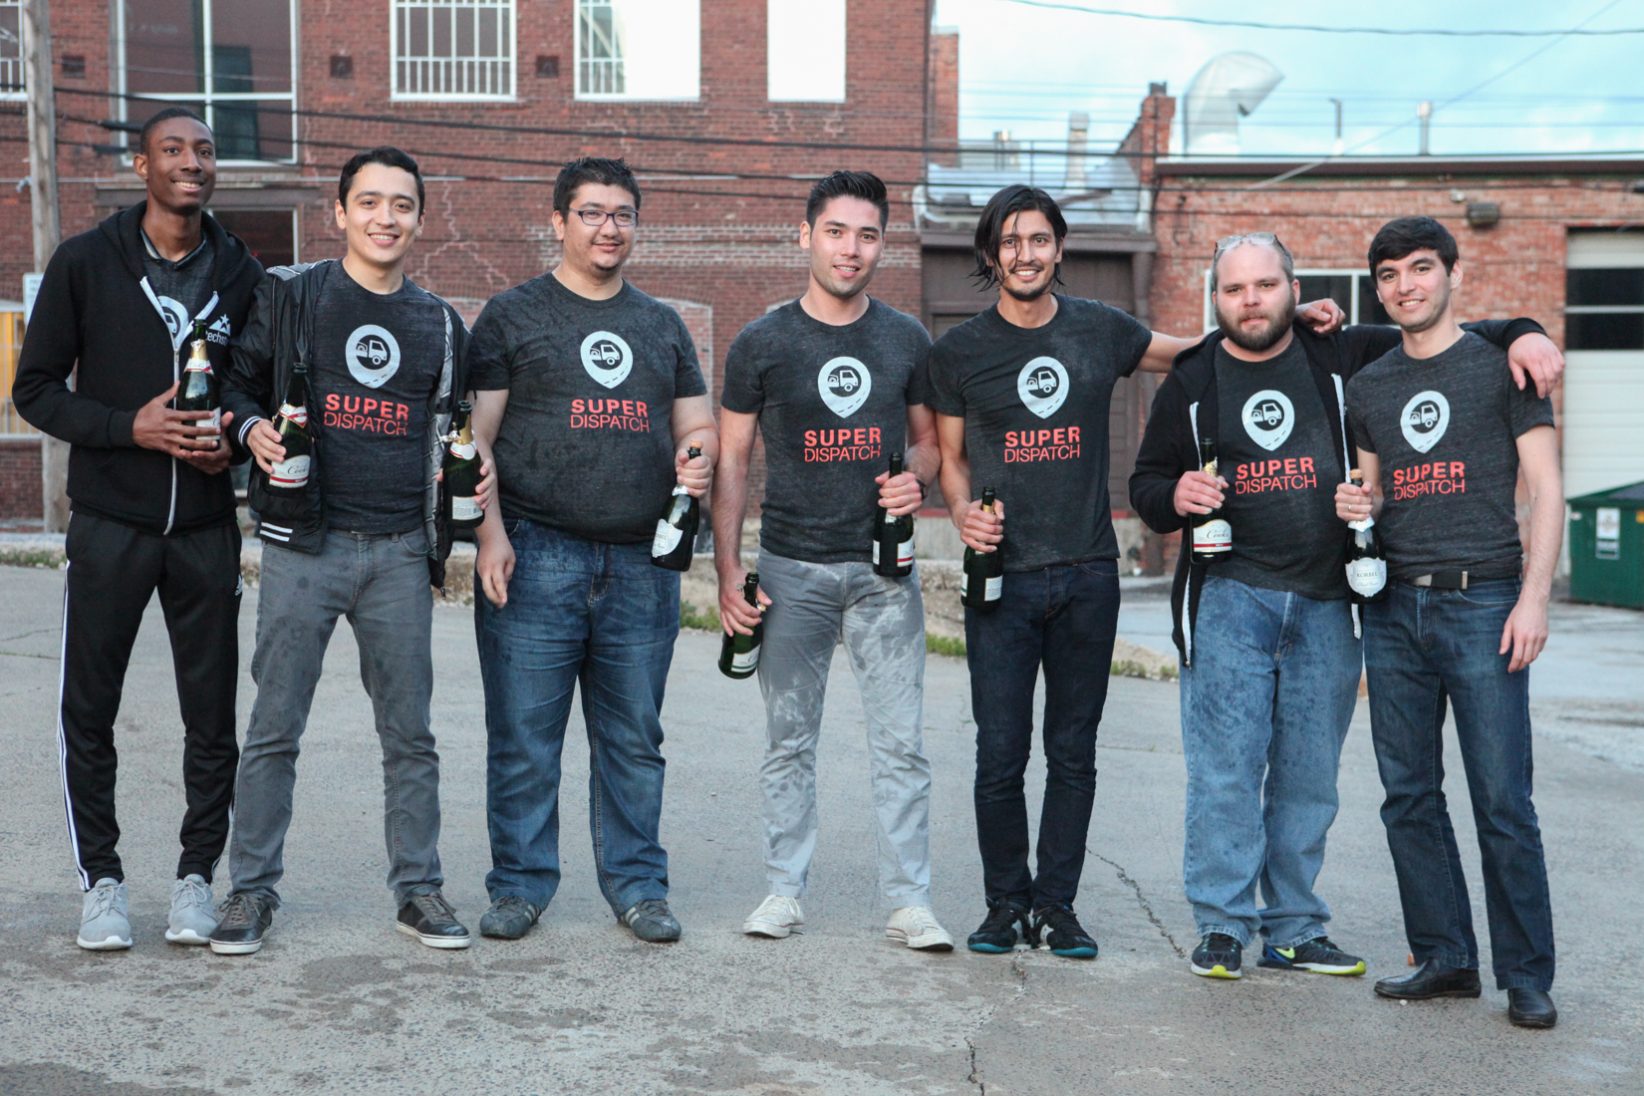 With traction in tow, Super Dispatch is a model ‘lean startup’